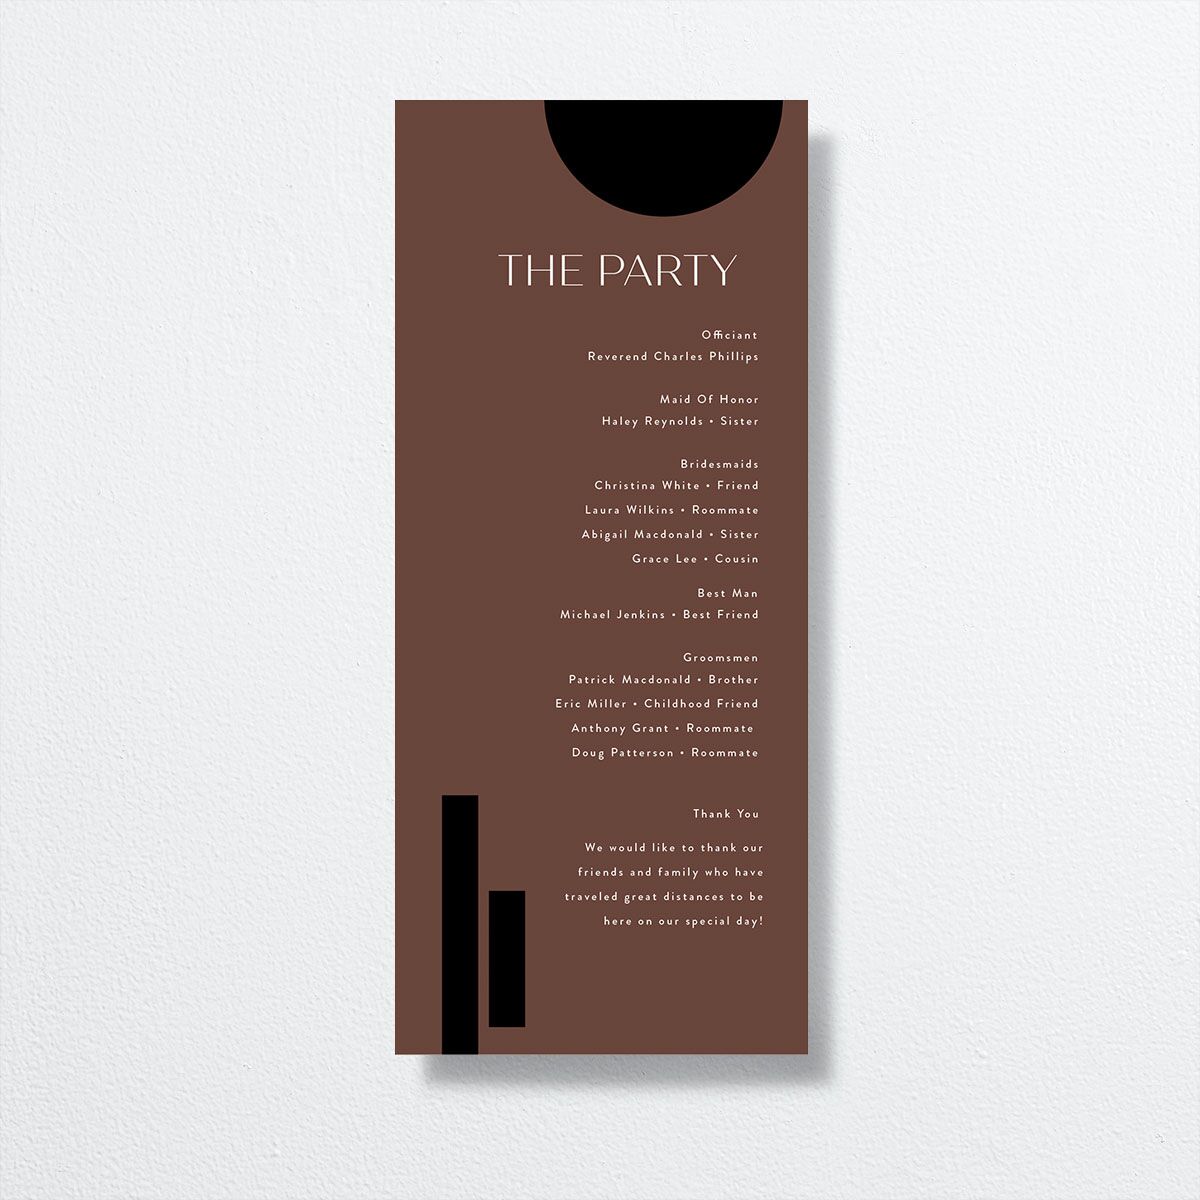 Neo Accent Wedding Programs back in brown